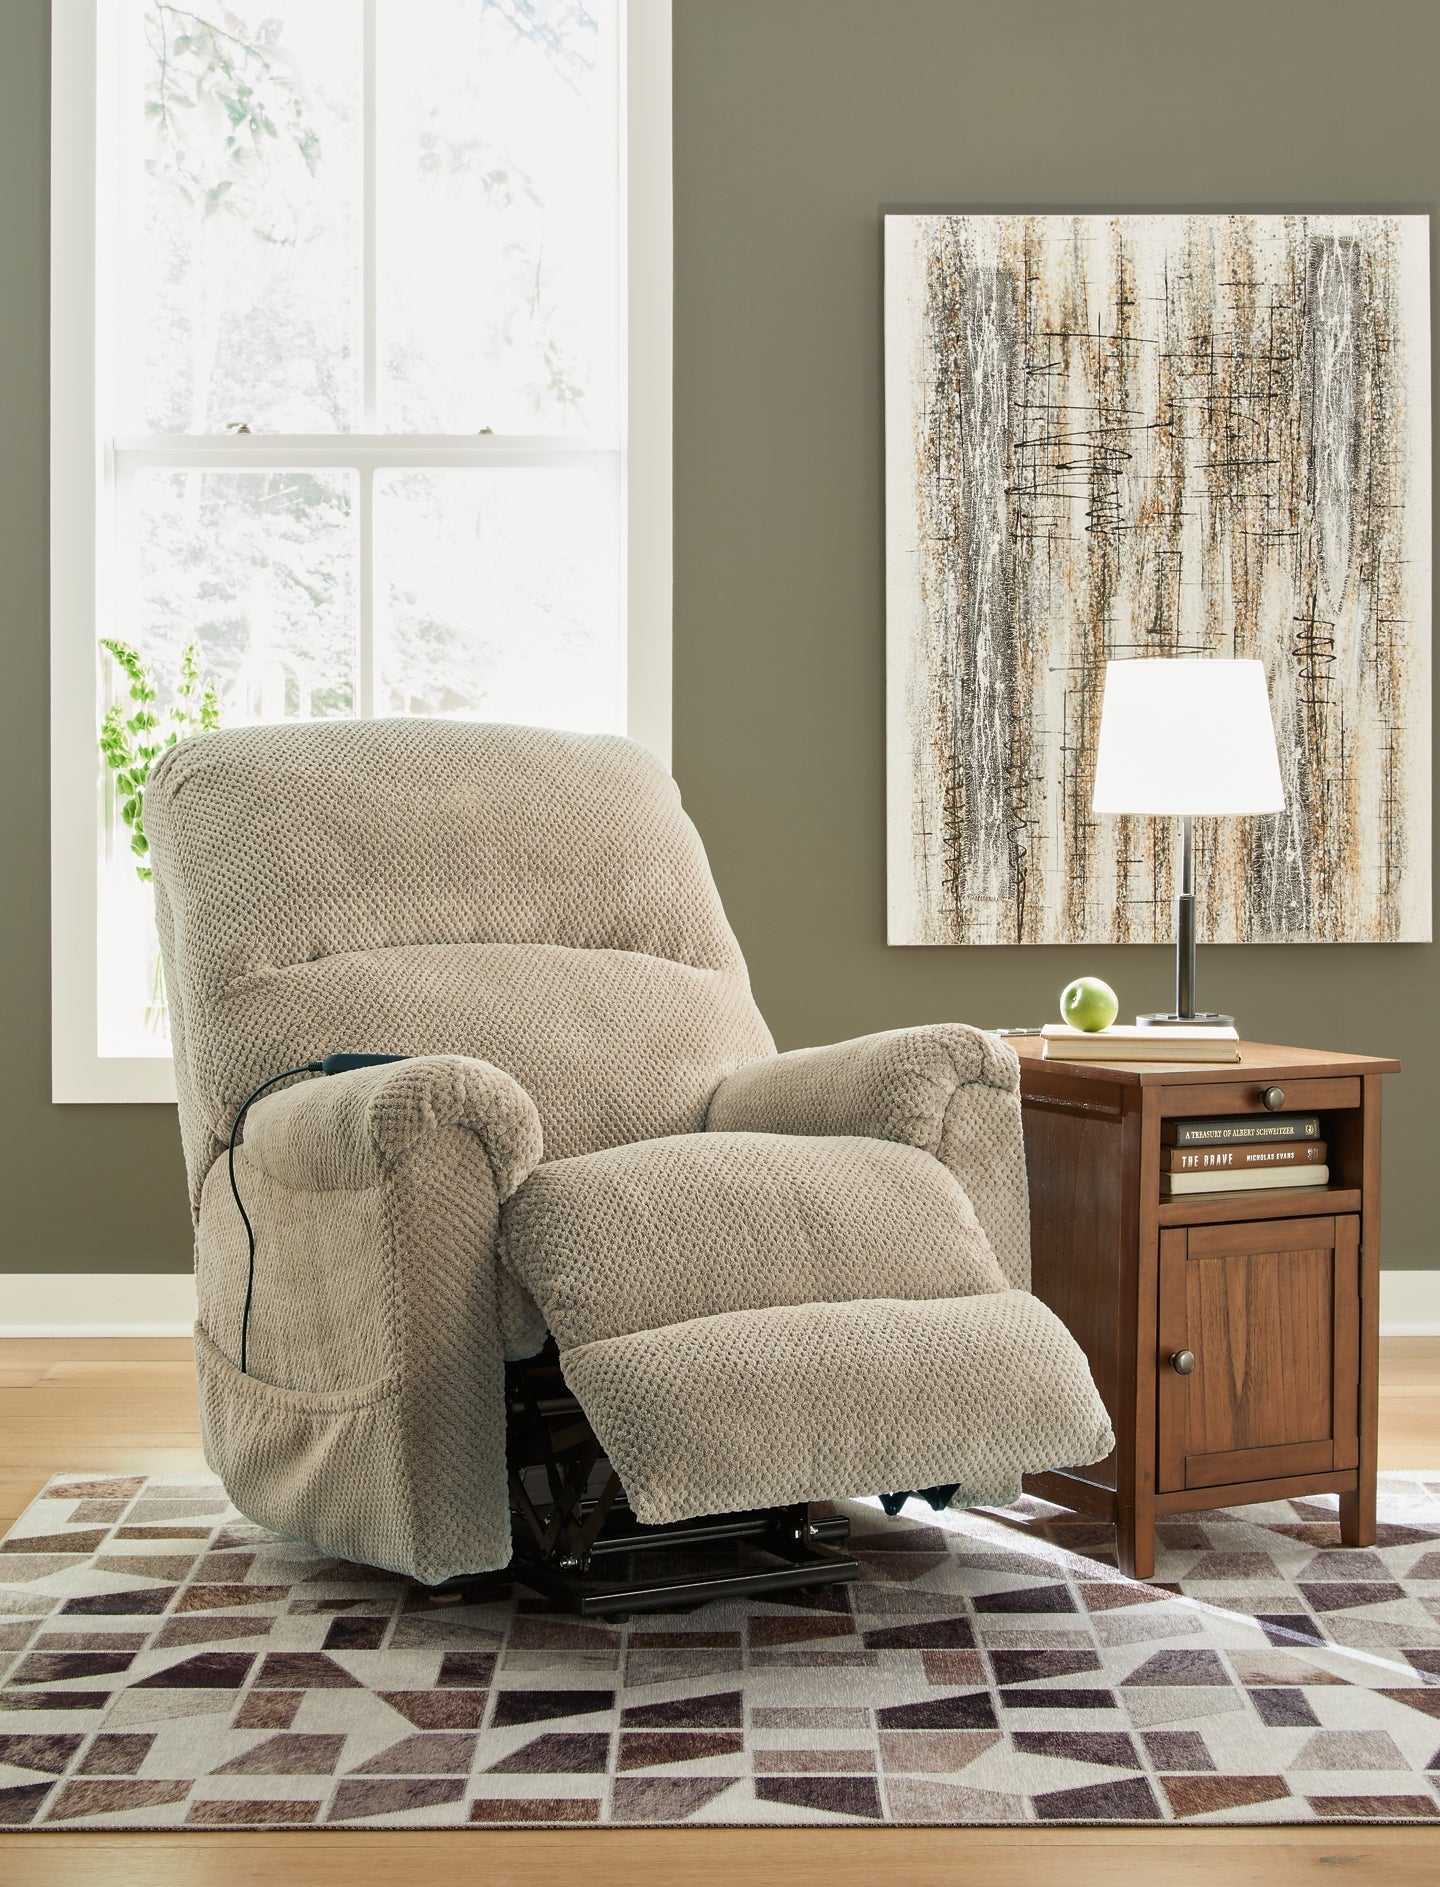 Shadowboxer Power Lift Recliner Rent Wise Rent To Own Jacksonville, Florida